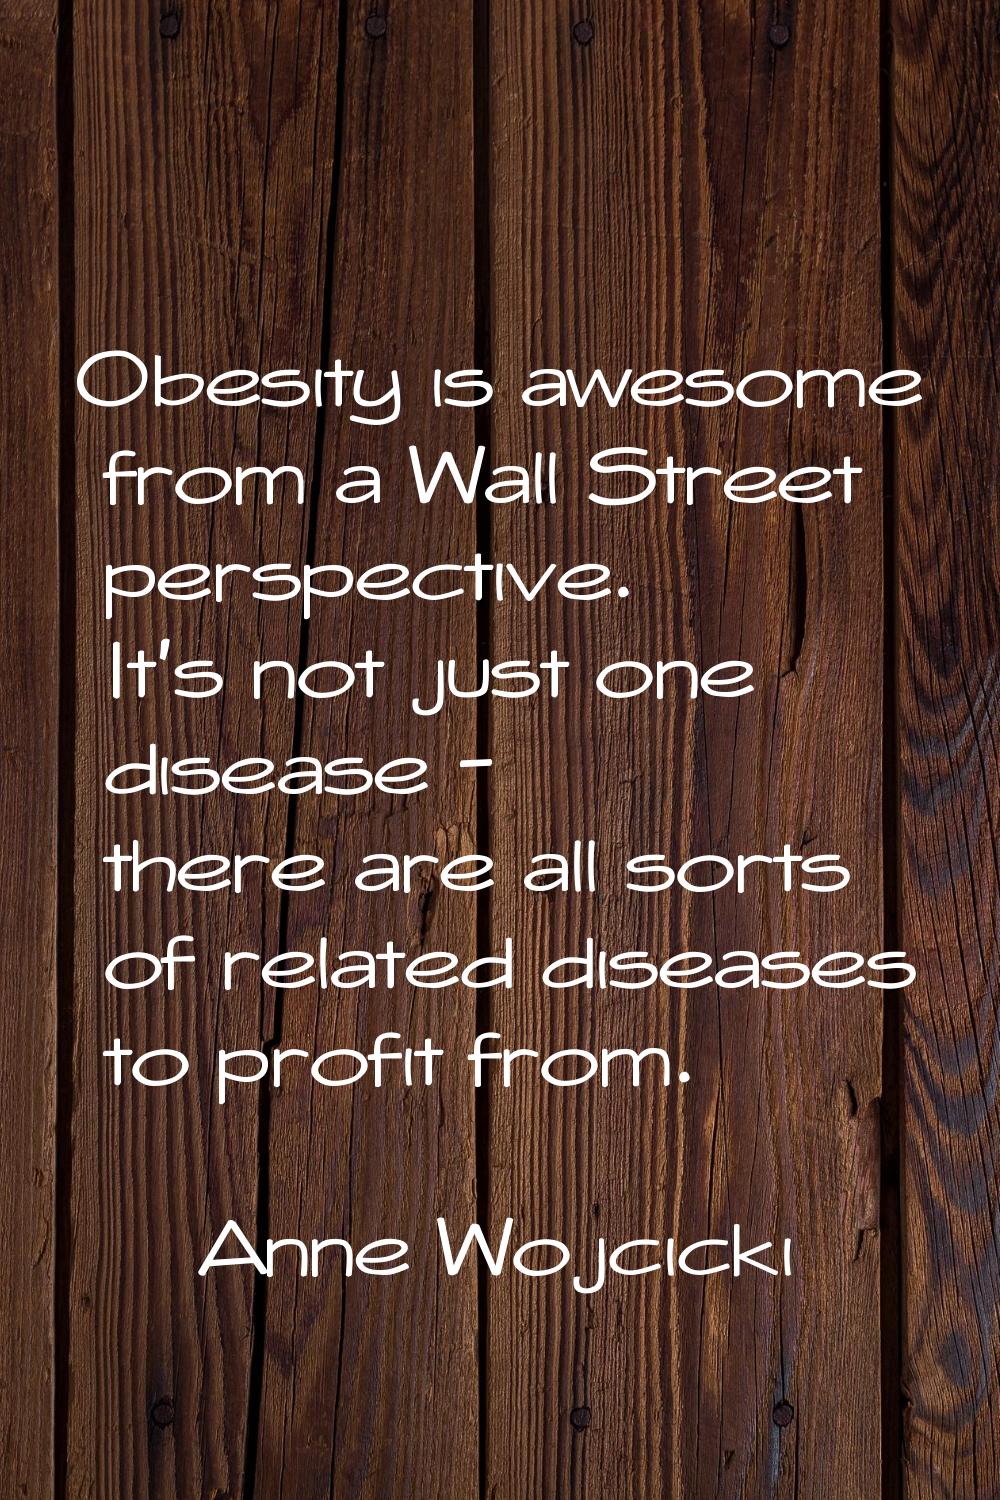 Obesity is awesome from a Wall Street perspective. It's not just one disease - there are all sorts 